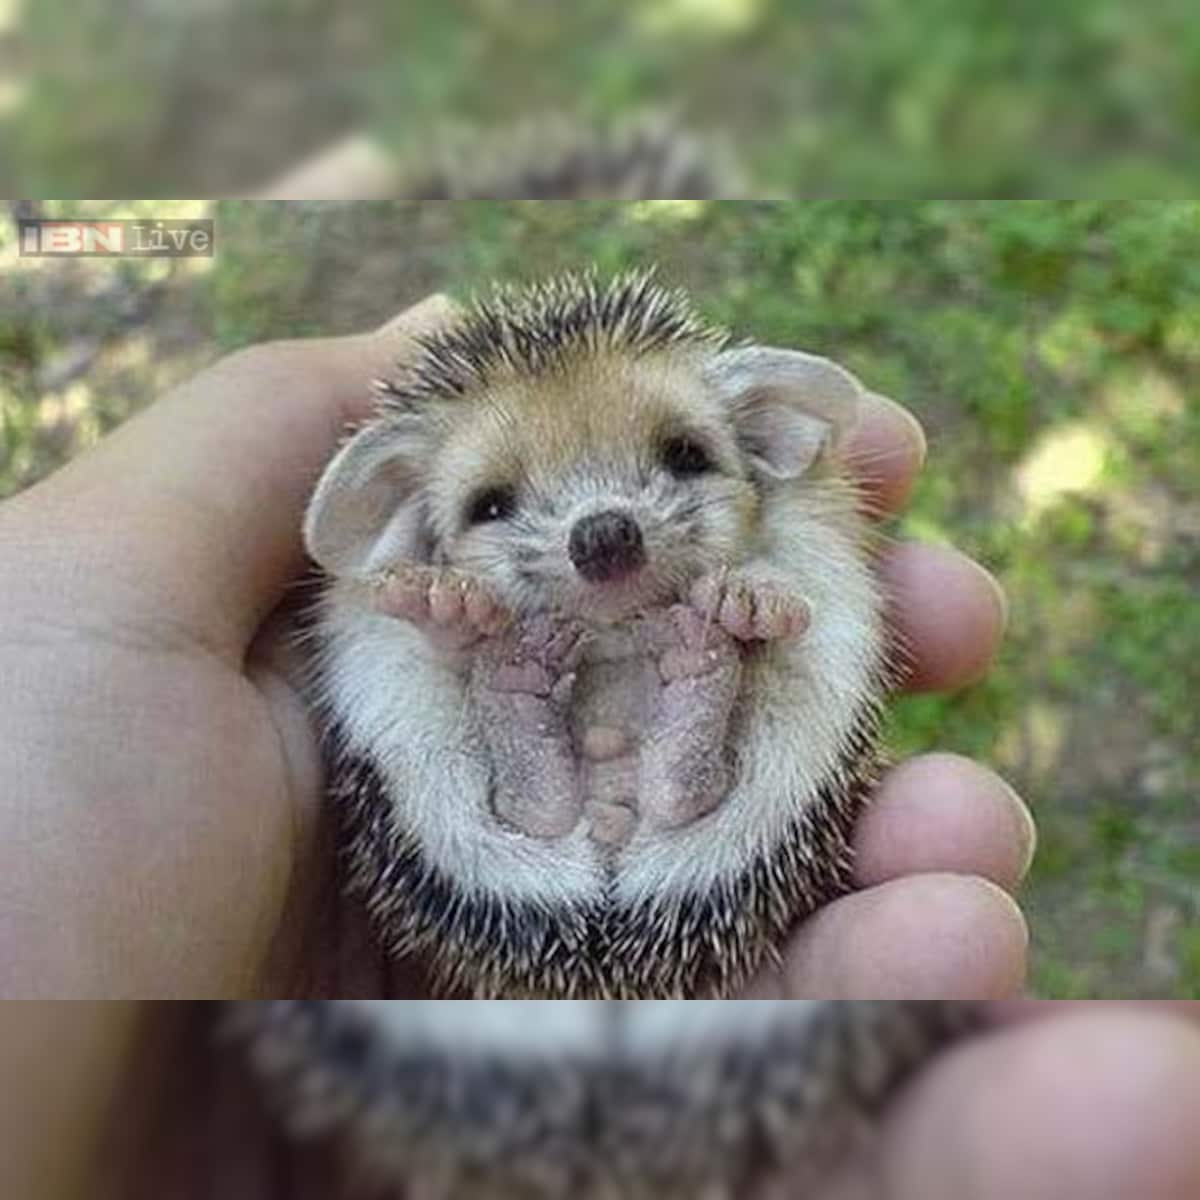 Baby Hippos Hedgehogs Rats Octopuses Foxes Unbelievably Cute And Unusual Baby Animals That Will Make You Go Squeee